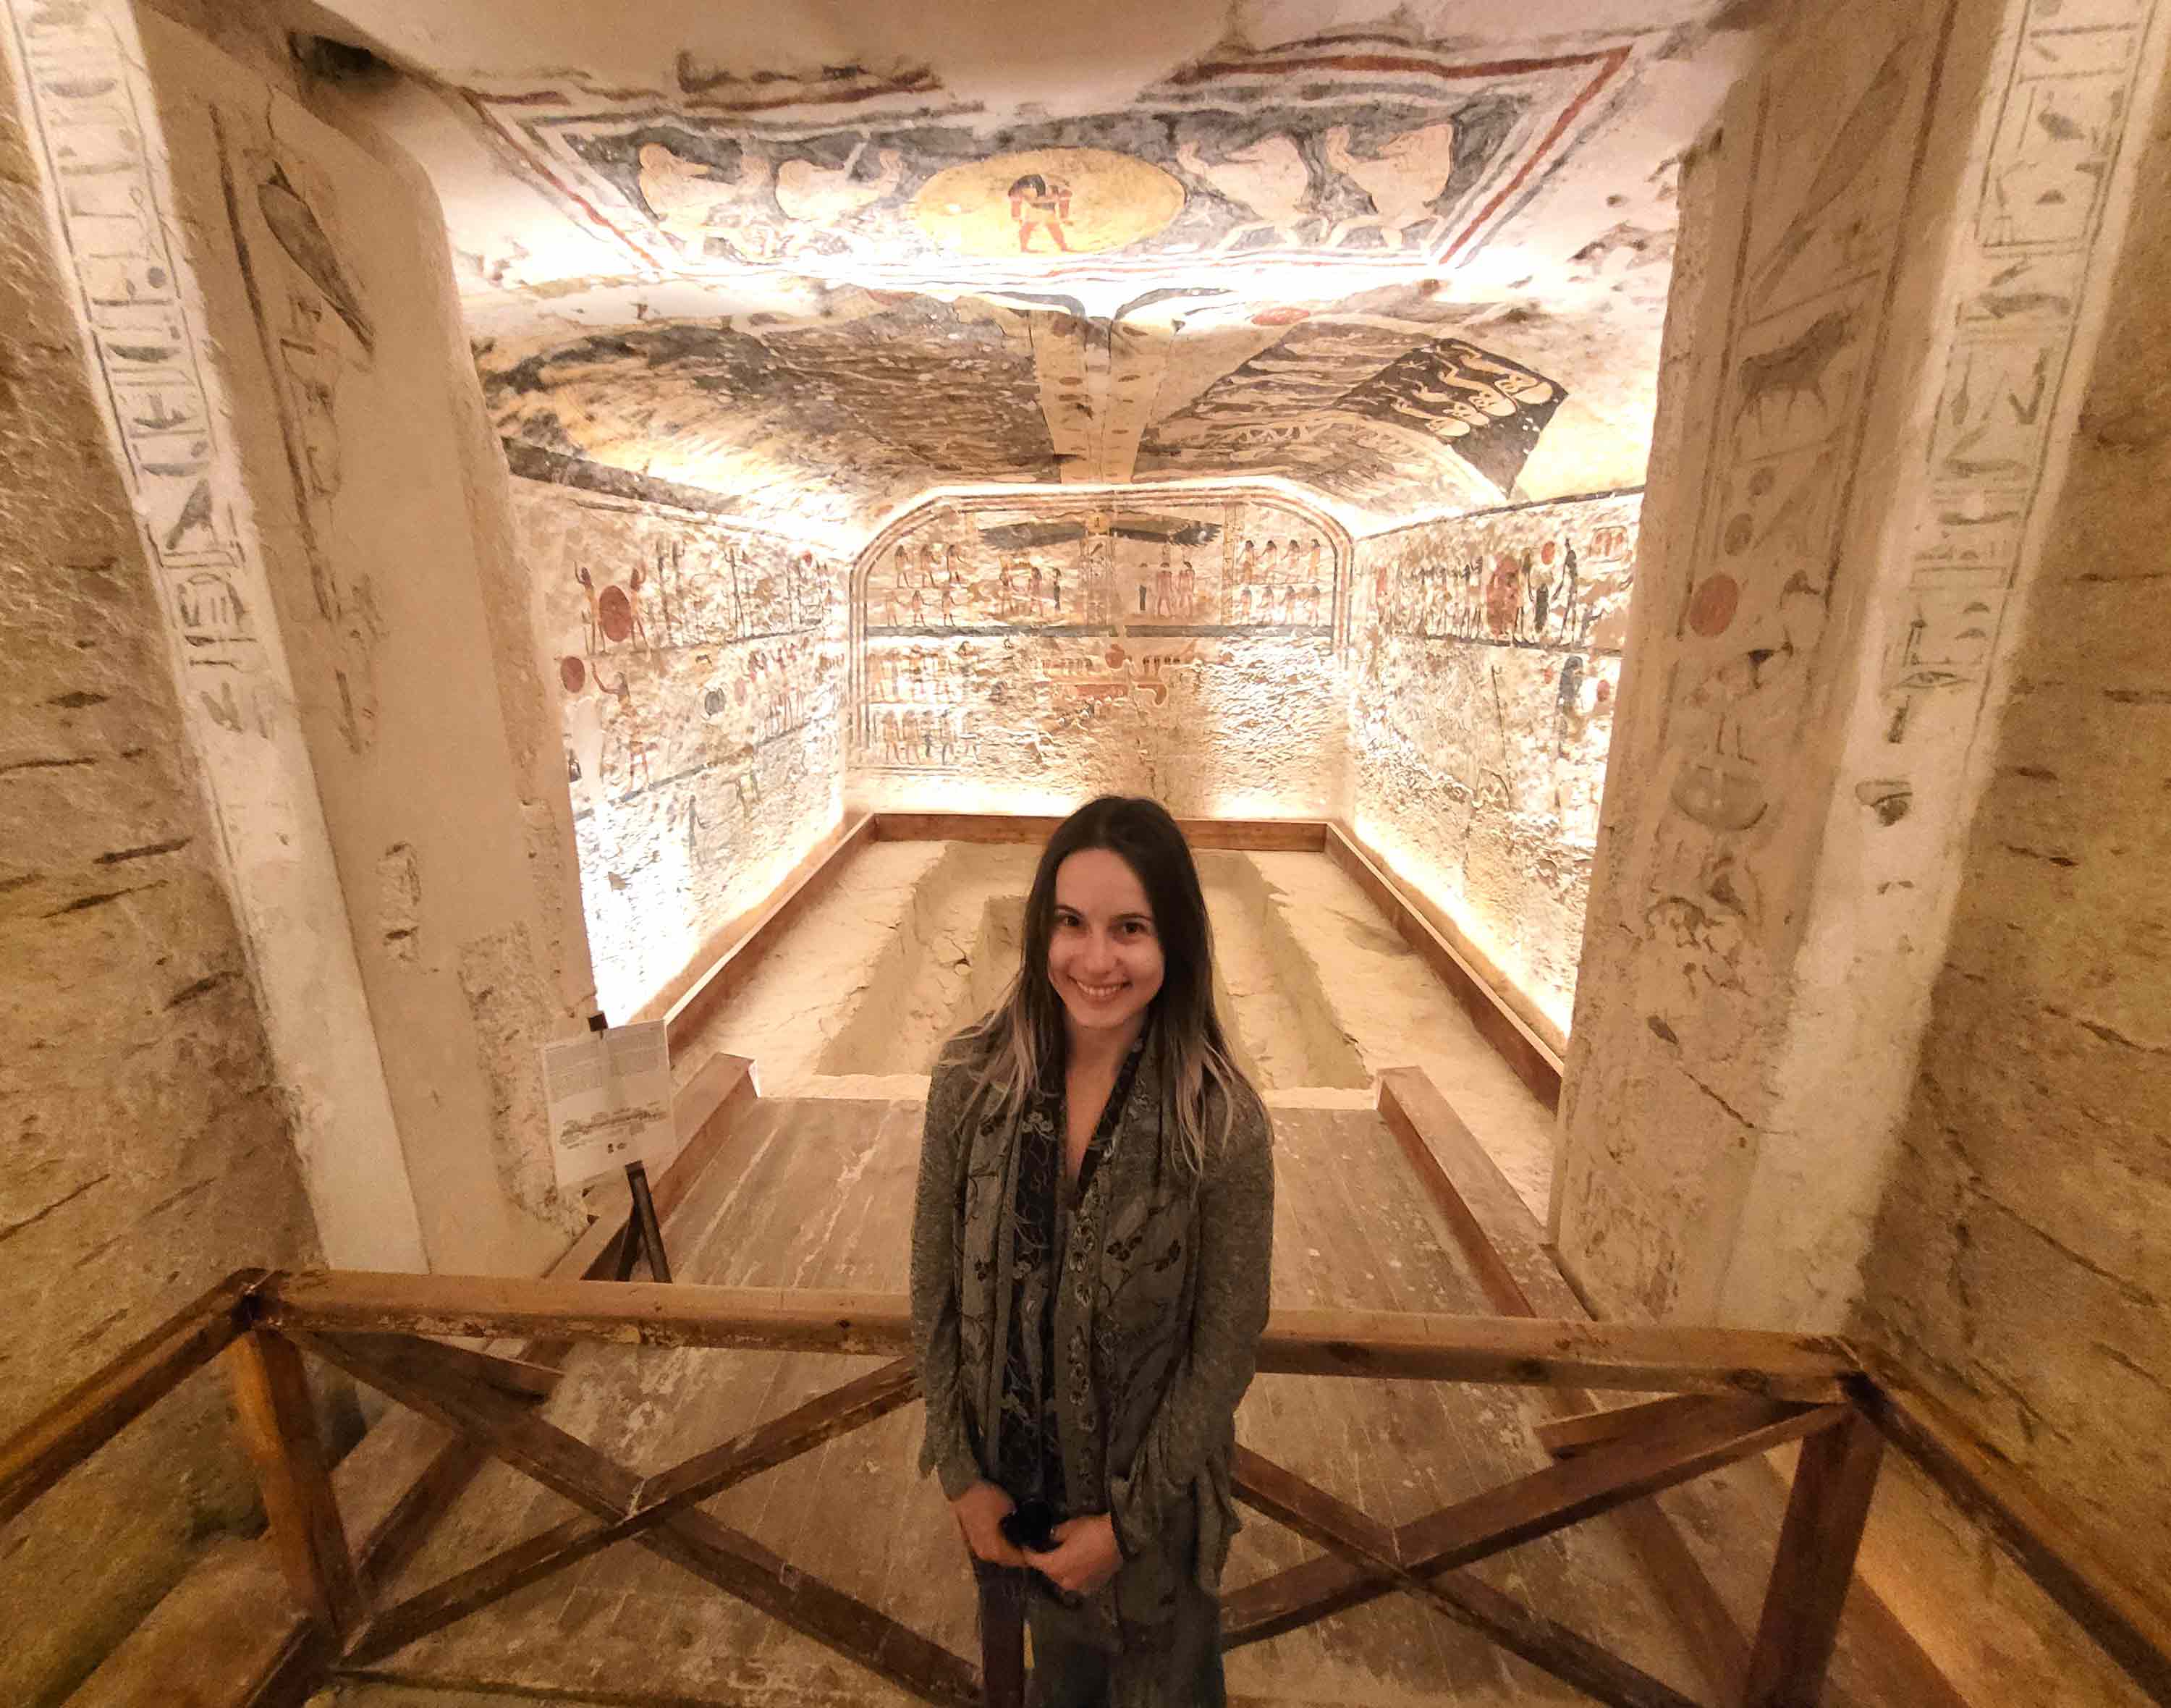 Exploring the tomb of Ramses V and VI at Luxor’s Valley of the Kings in Egypt